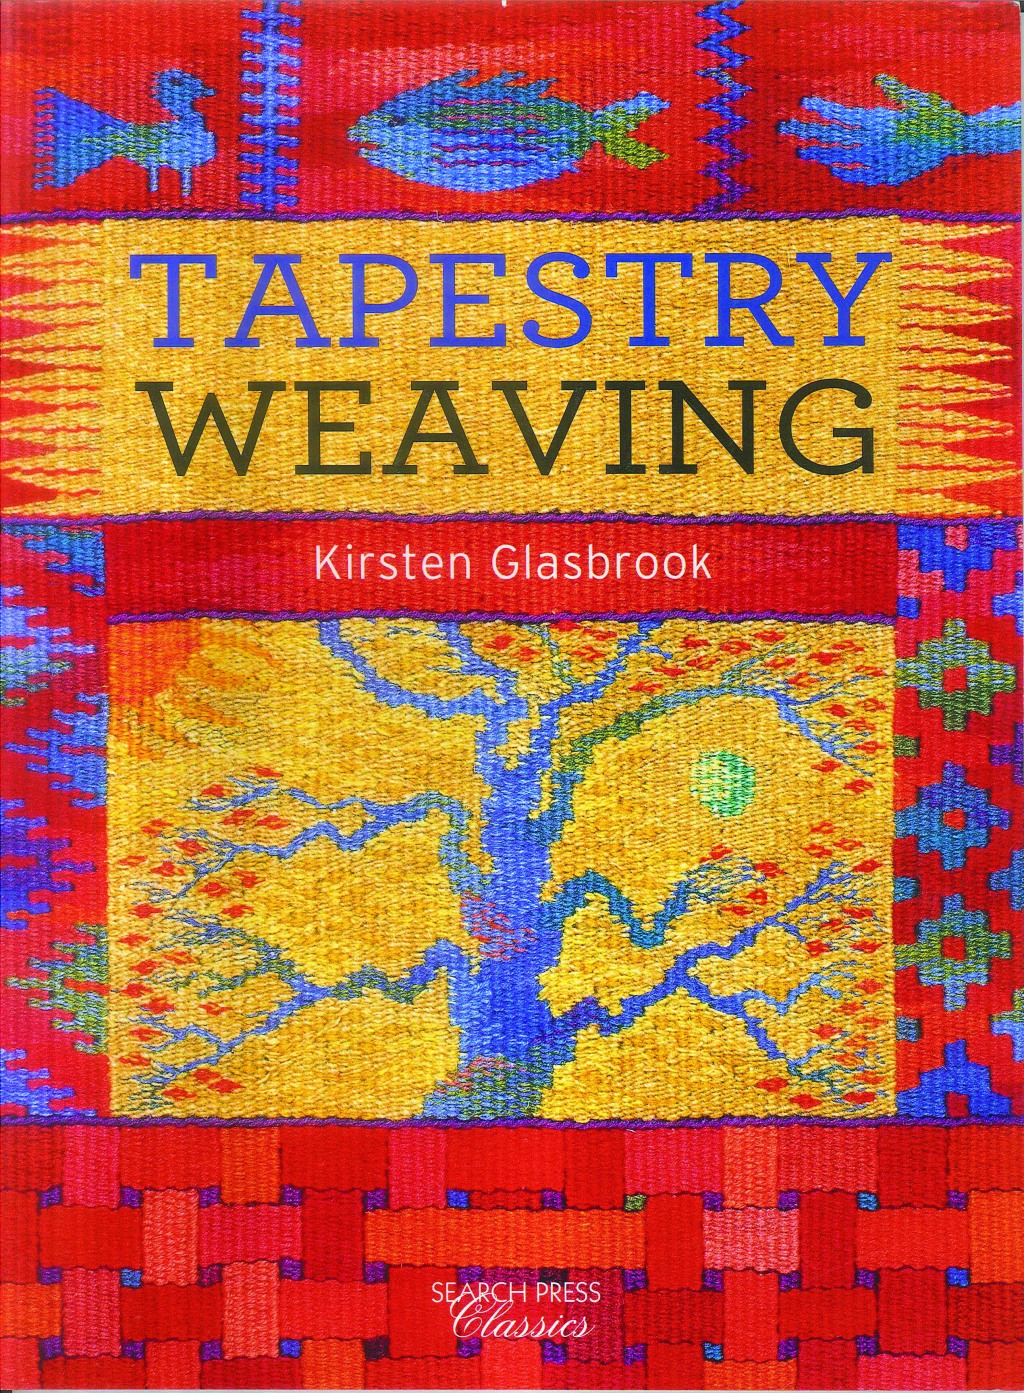 Why Tapestry Weaving?